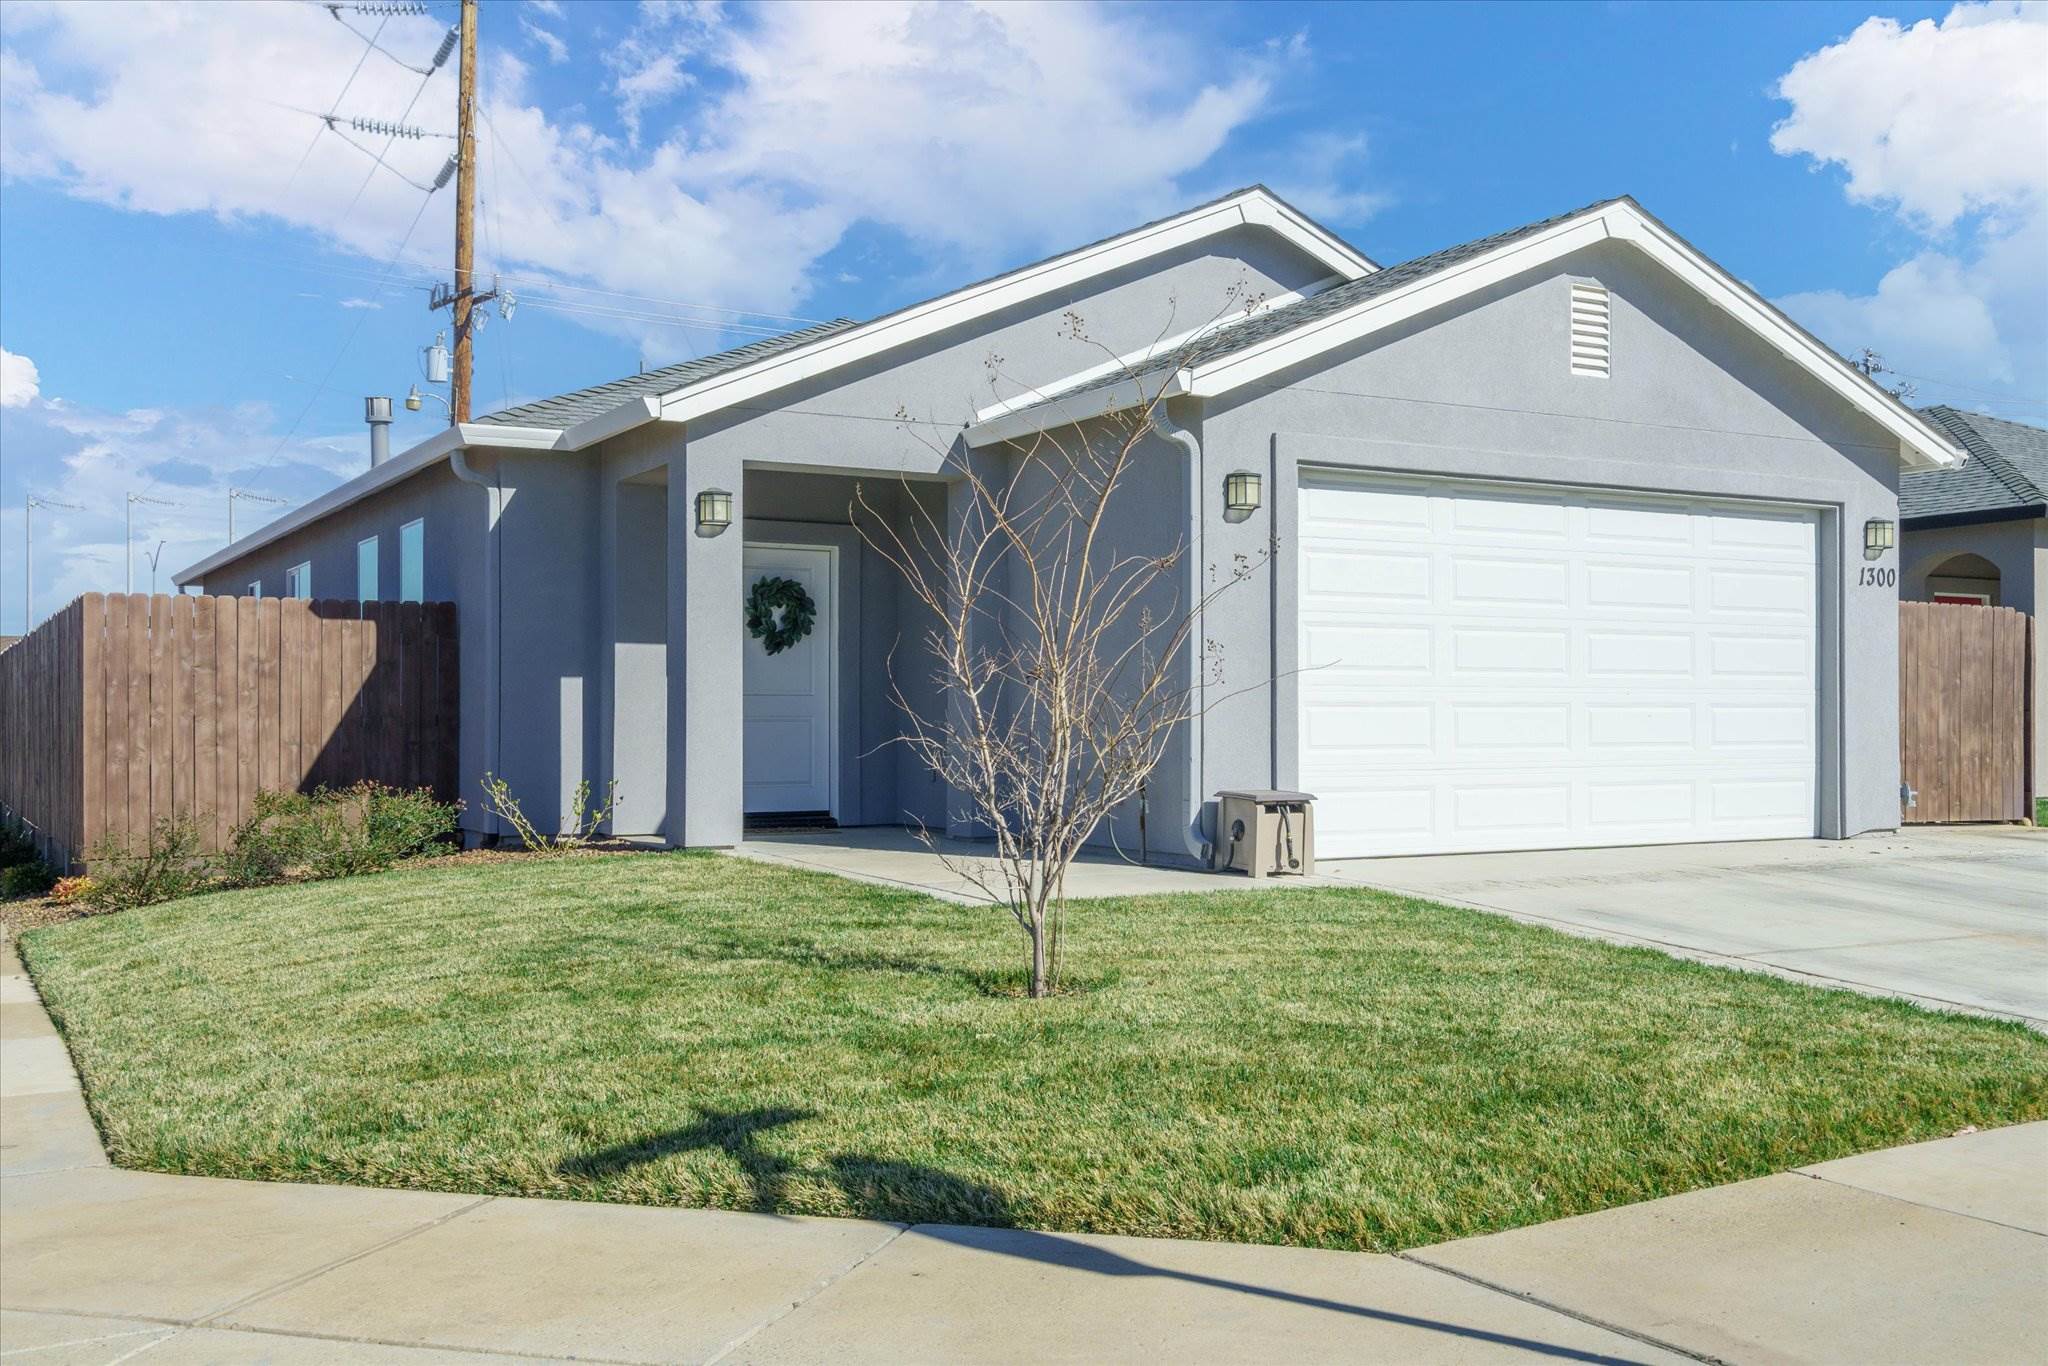 1300 Lucy Way, Chico, CA 95973